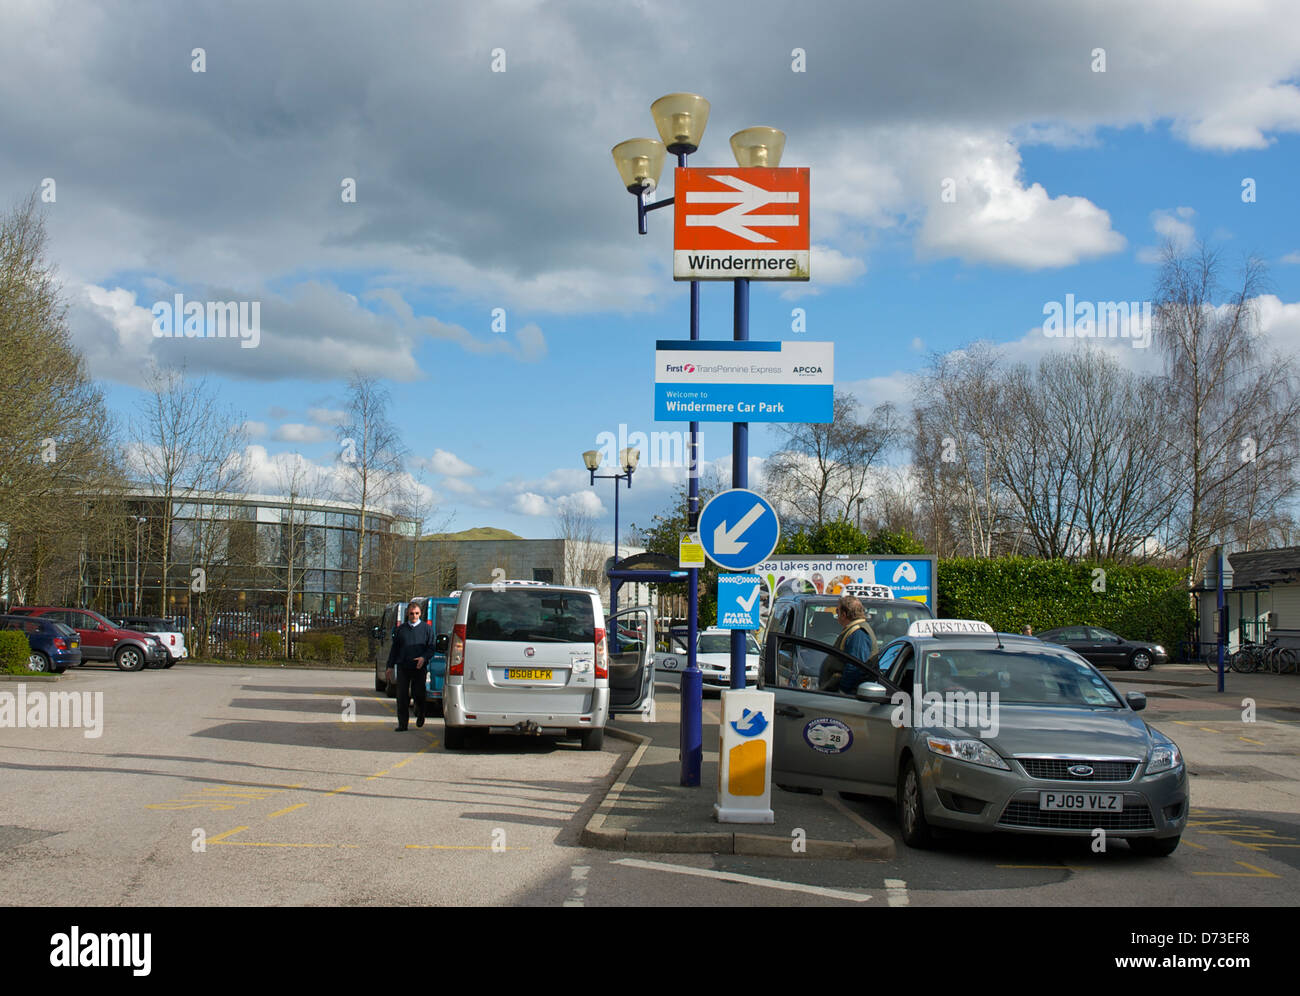 Taxi rank at Windermere railway station, Lake District National Park, Cumbria, England UK Stock Photo